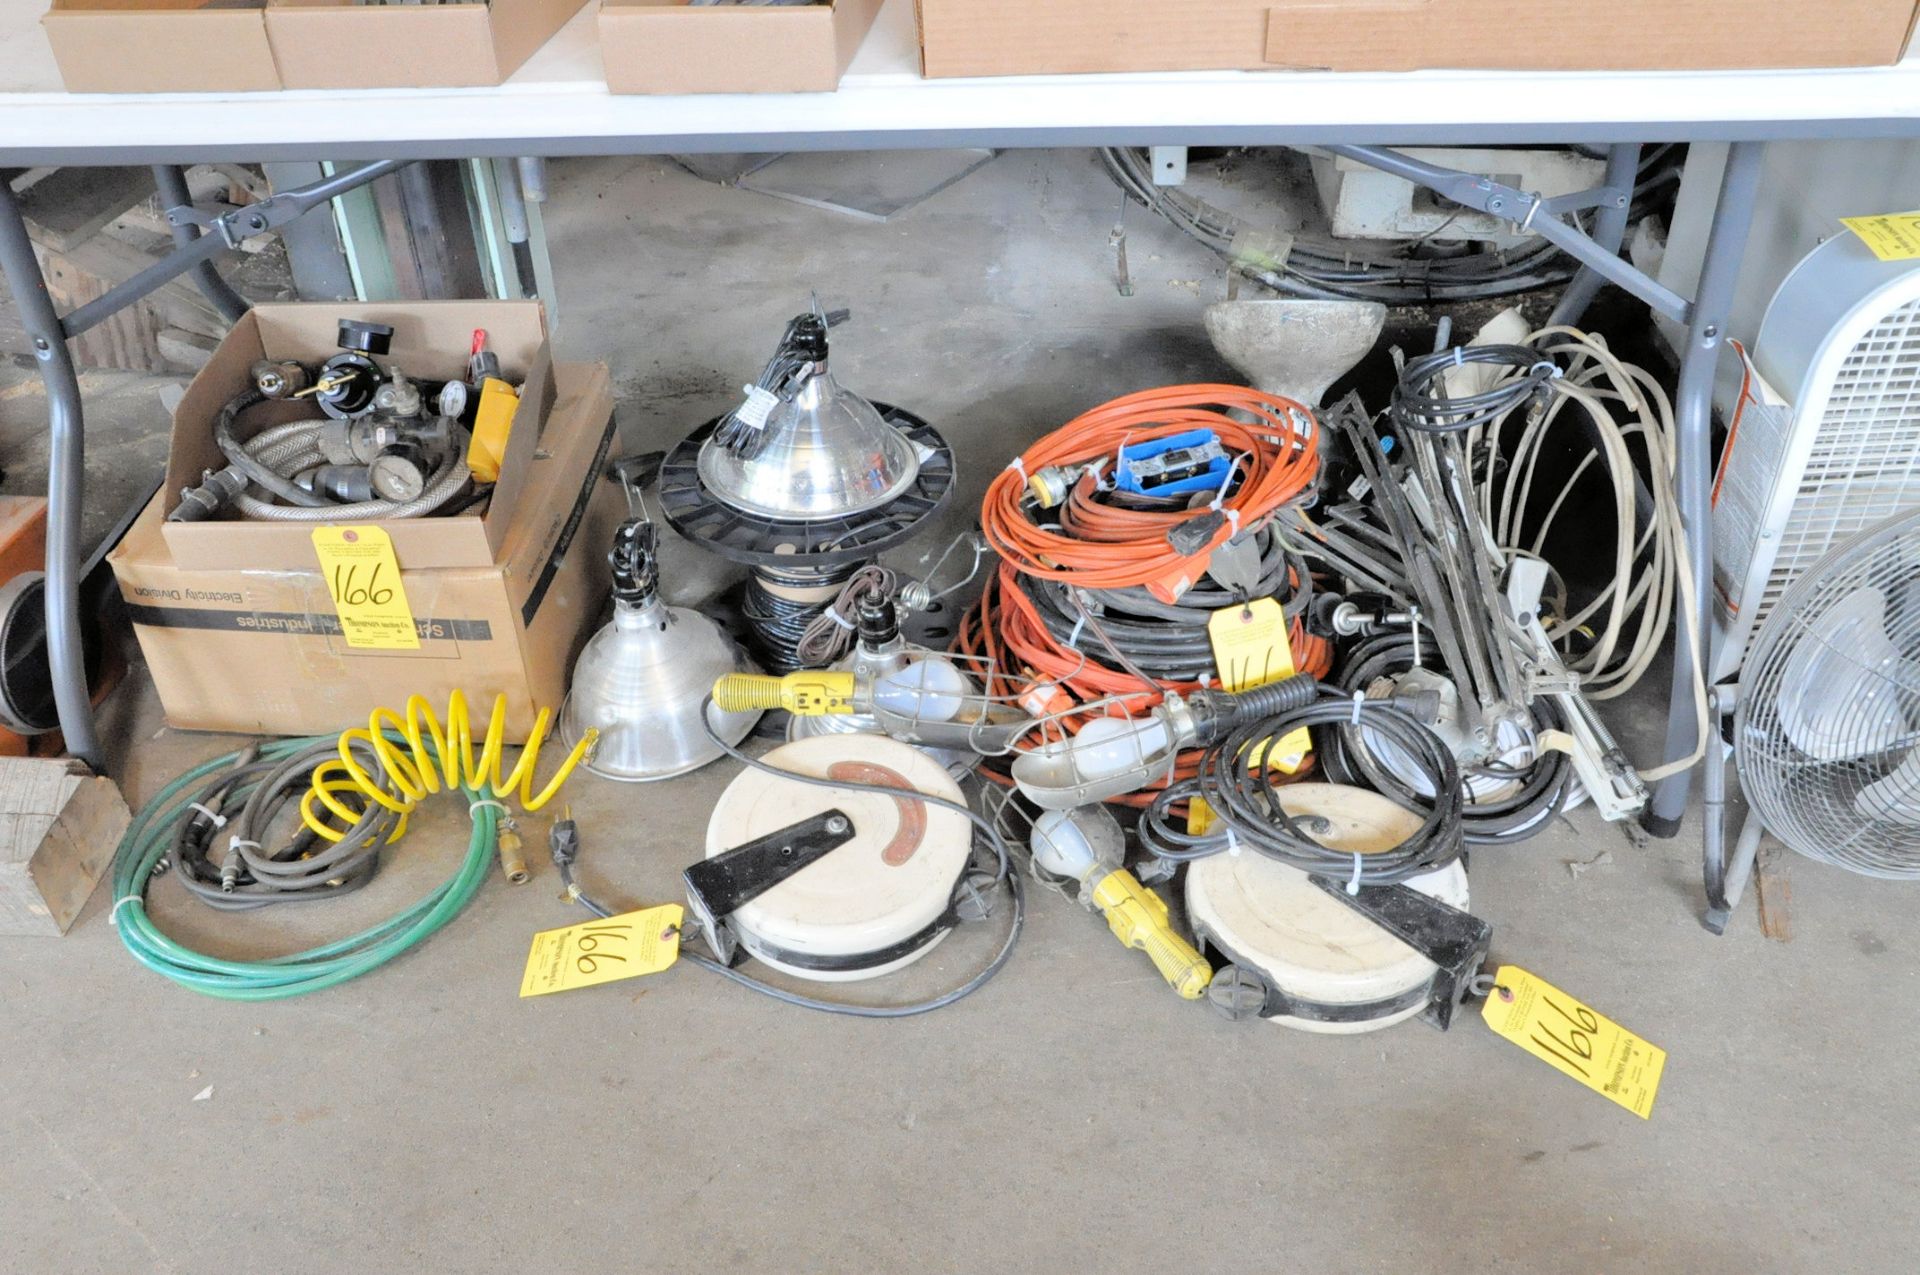 Lot-Extension Cords, Automotive Lights, Work Lights and Cord Reels Under (1) Table